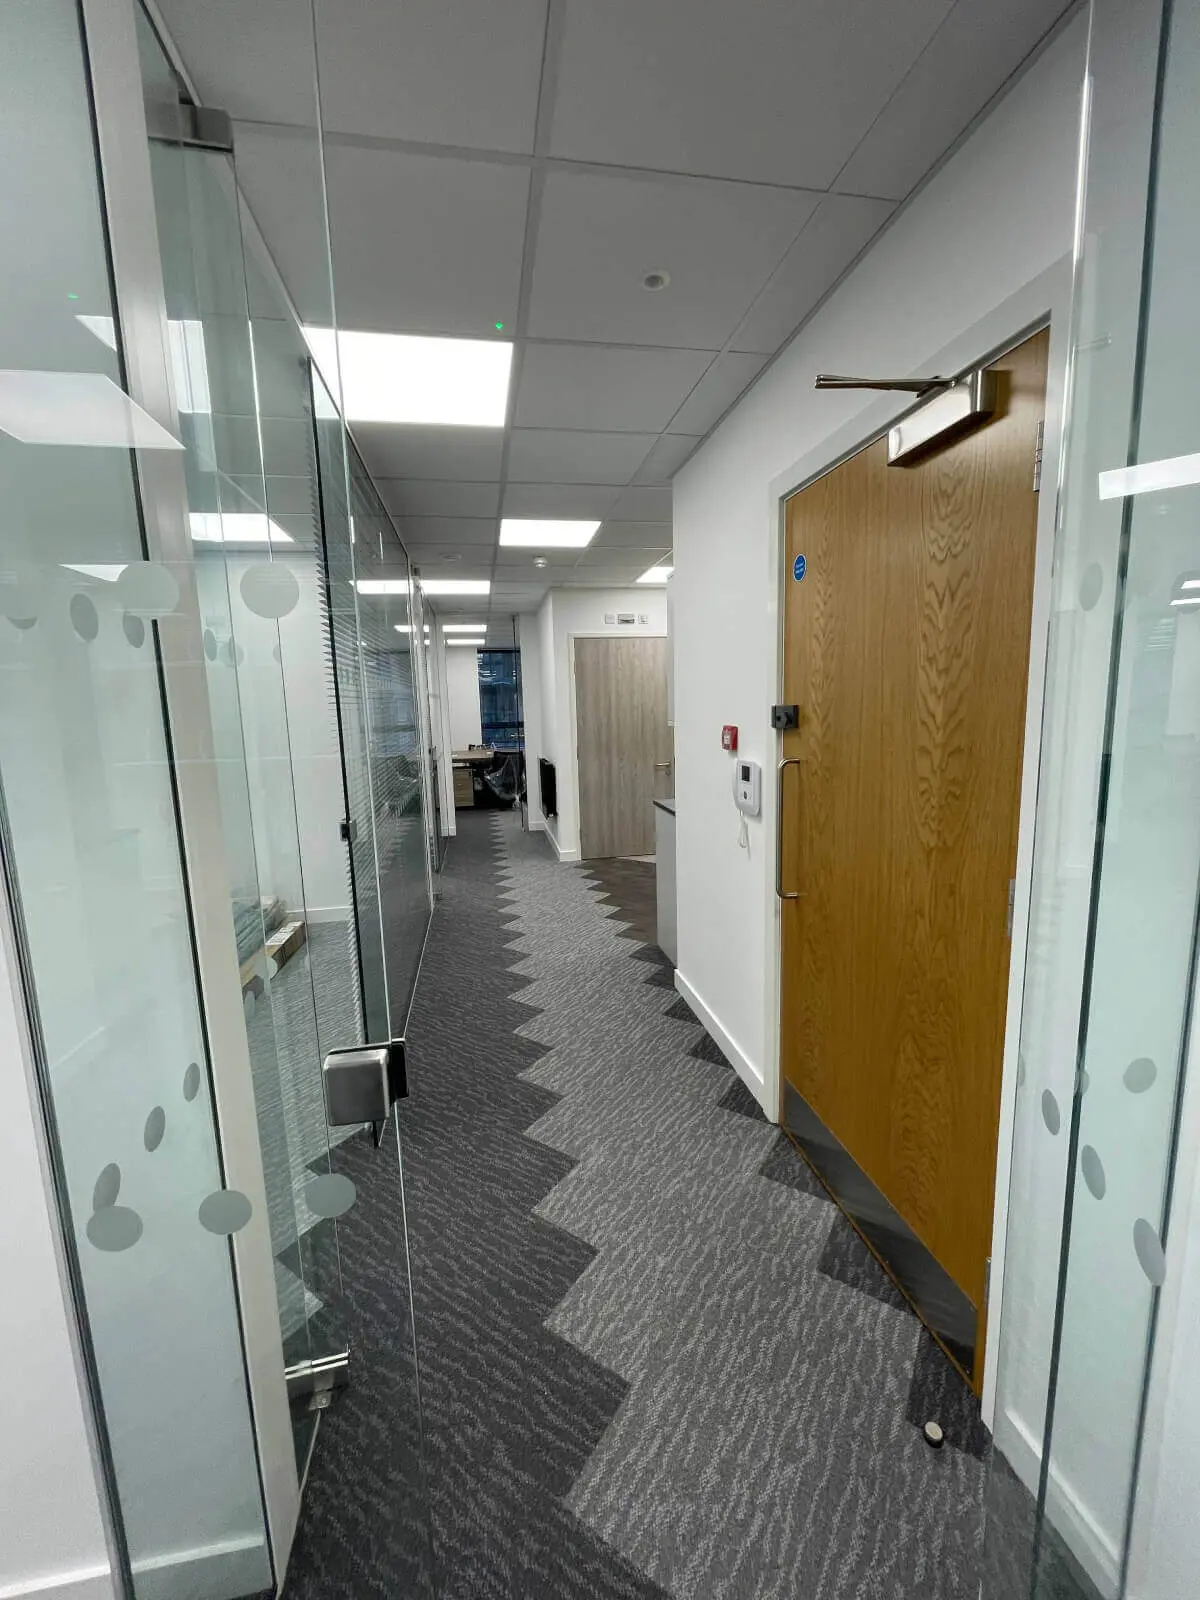 Hemsley Miller office space with designer flooring, funriture and single glazed glass partitions 16